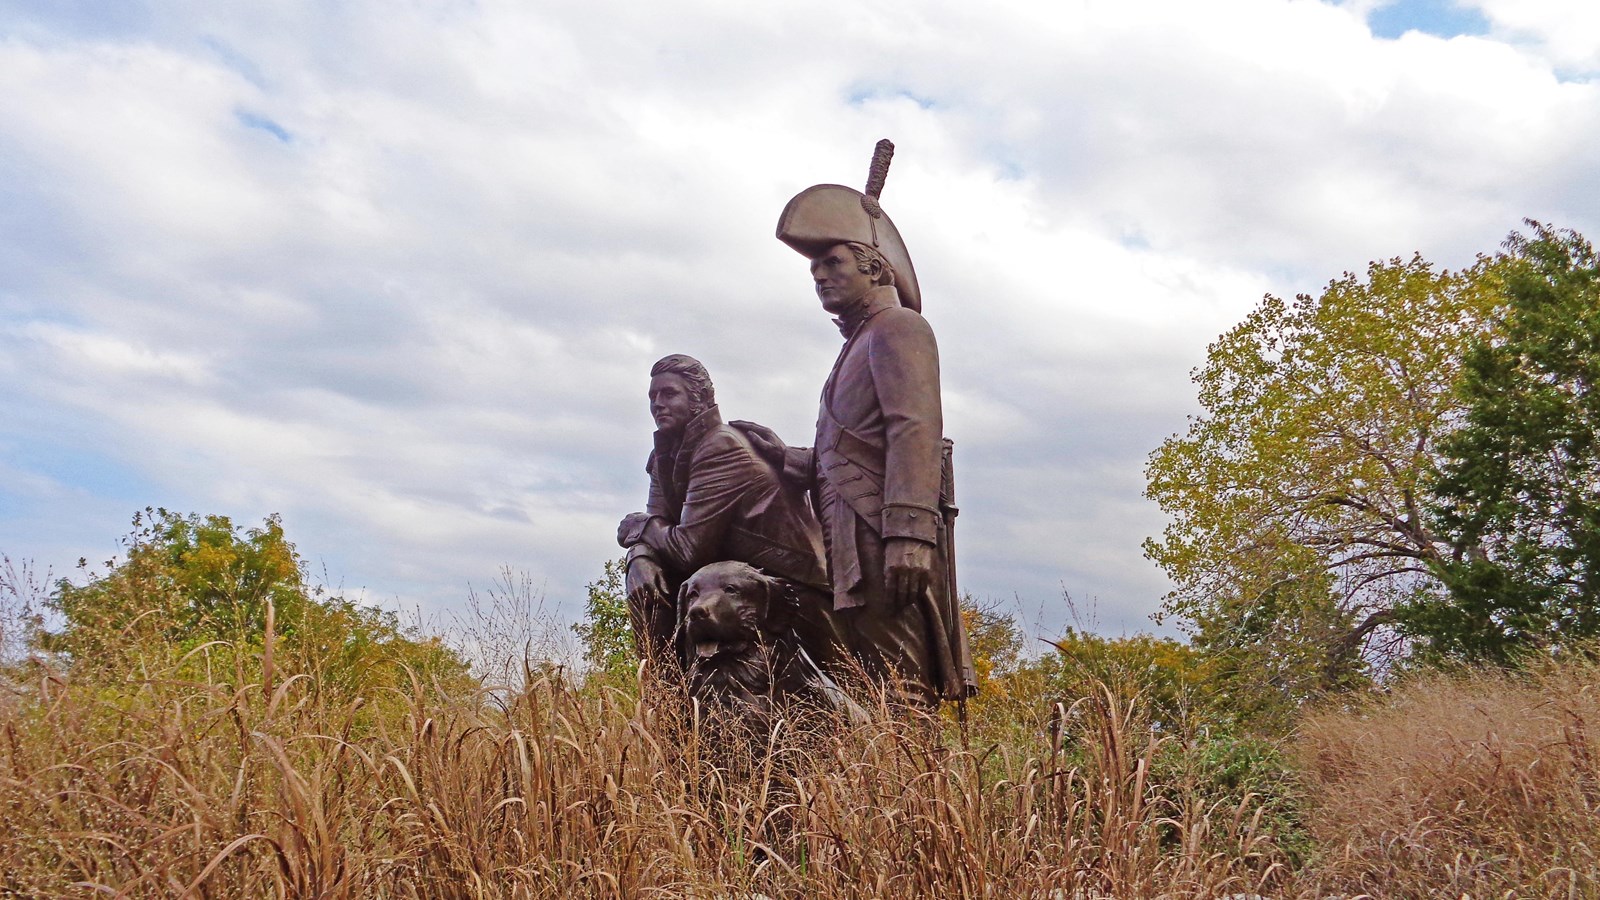 Statue of Lewis, Clark and Seaman the dog